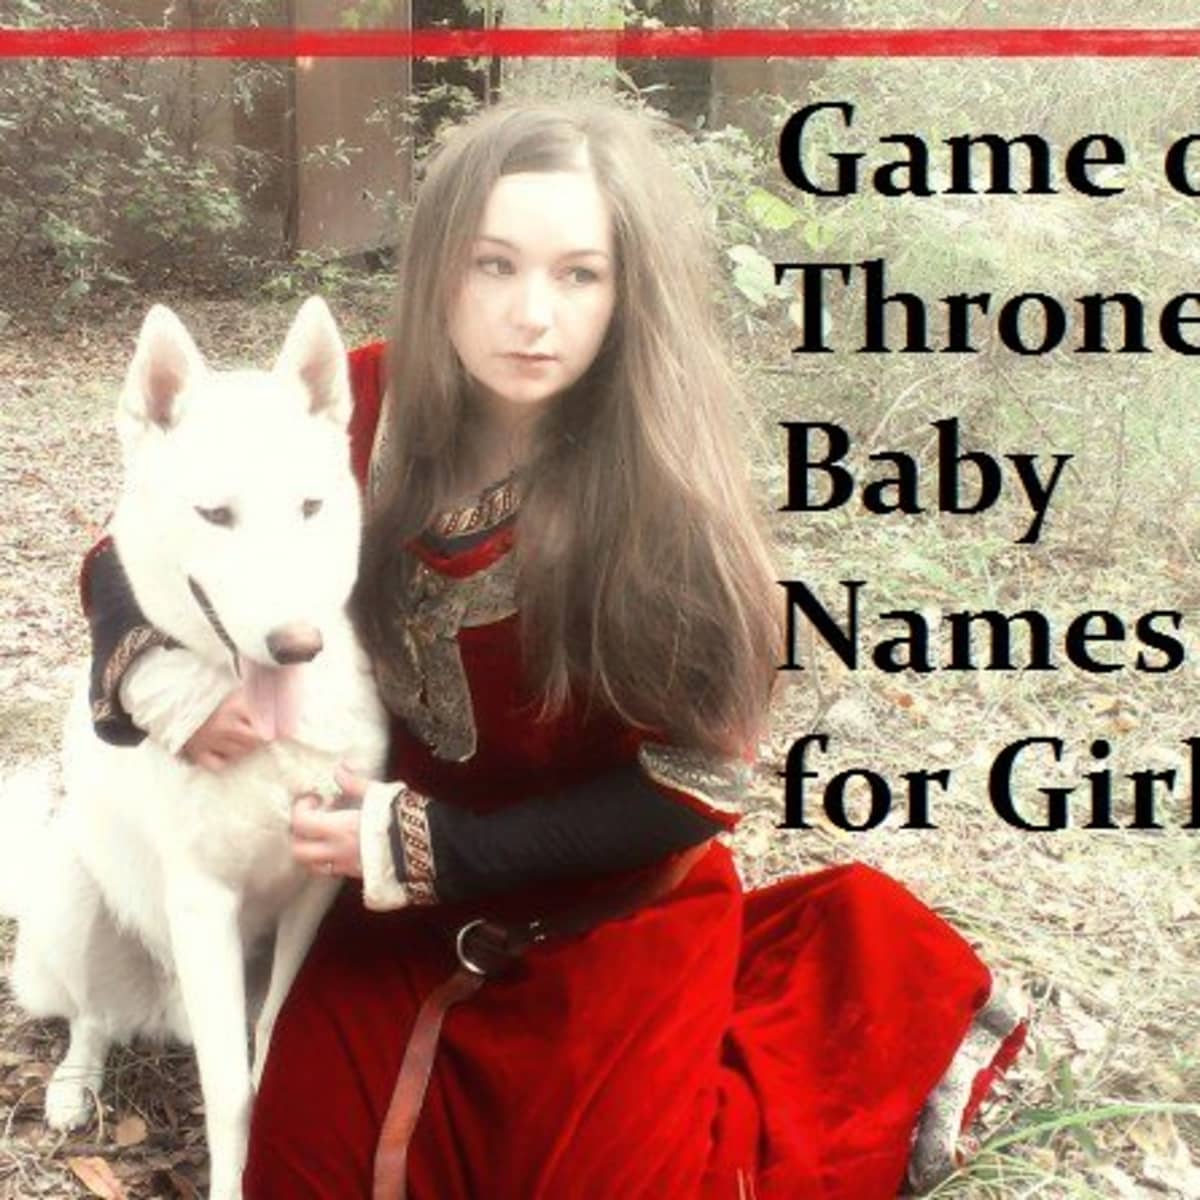 Game of Thrones" Baby Names for Girls